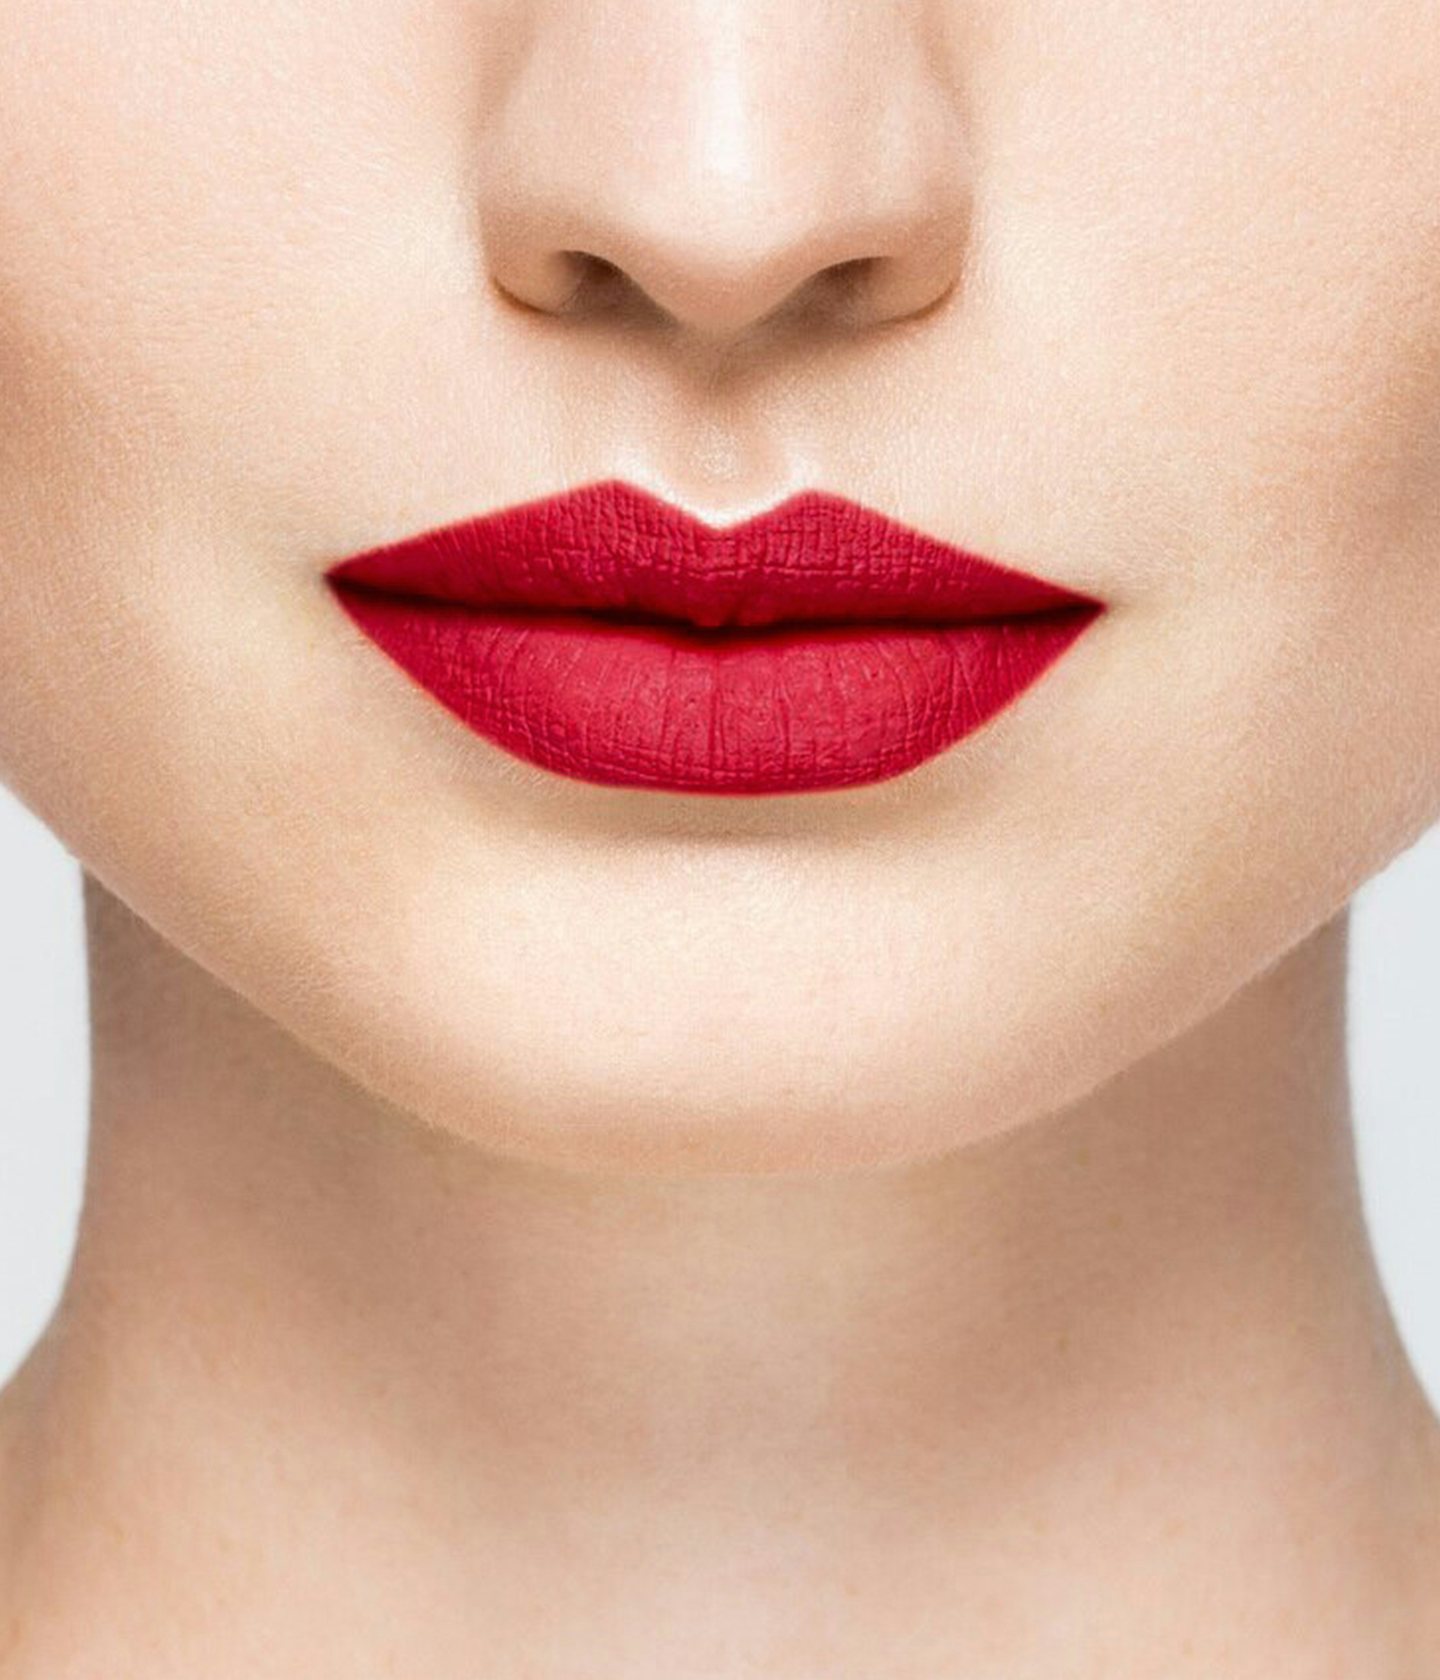 La bouche rouge Le Rouge Rosie lipstick shade on the lips of a fair skin model